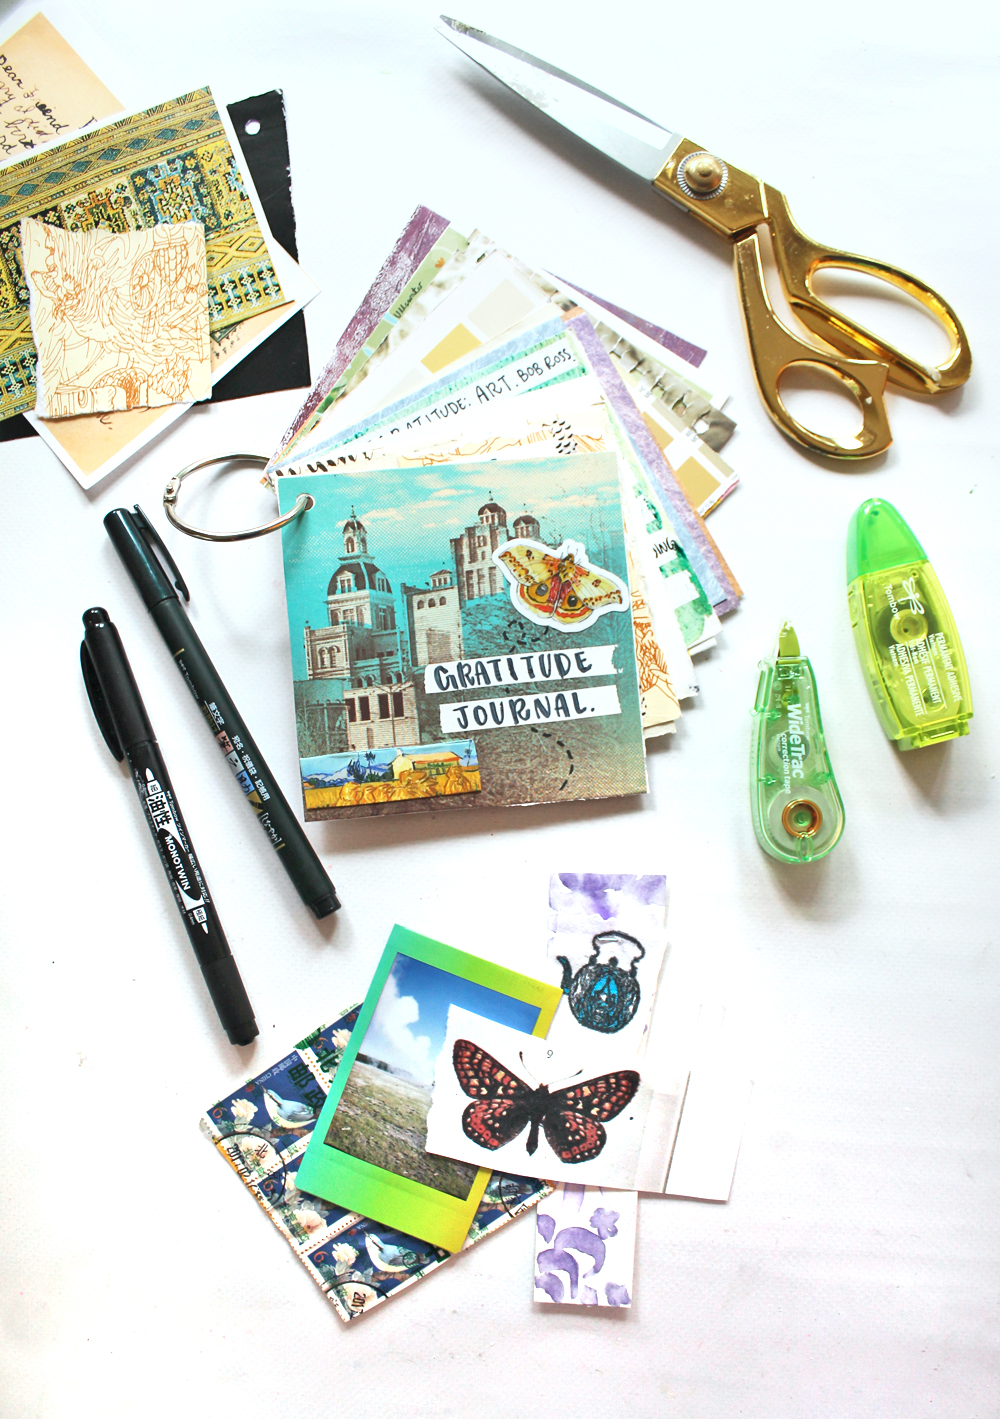 How to Make a Mini Art Journal from Scratch - Tombow USA Blog